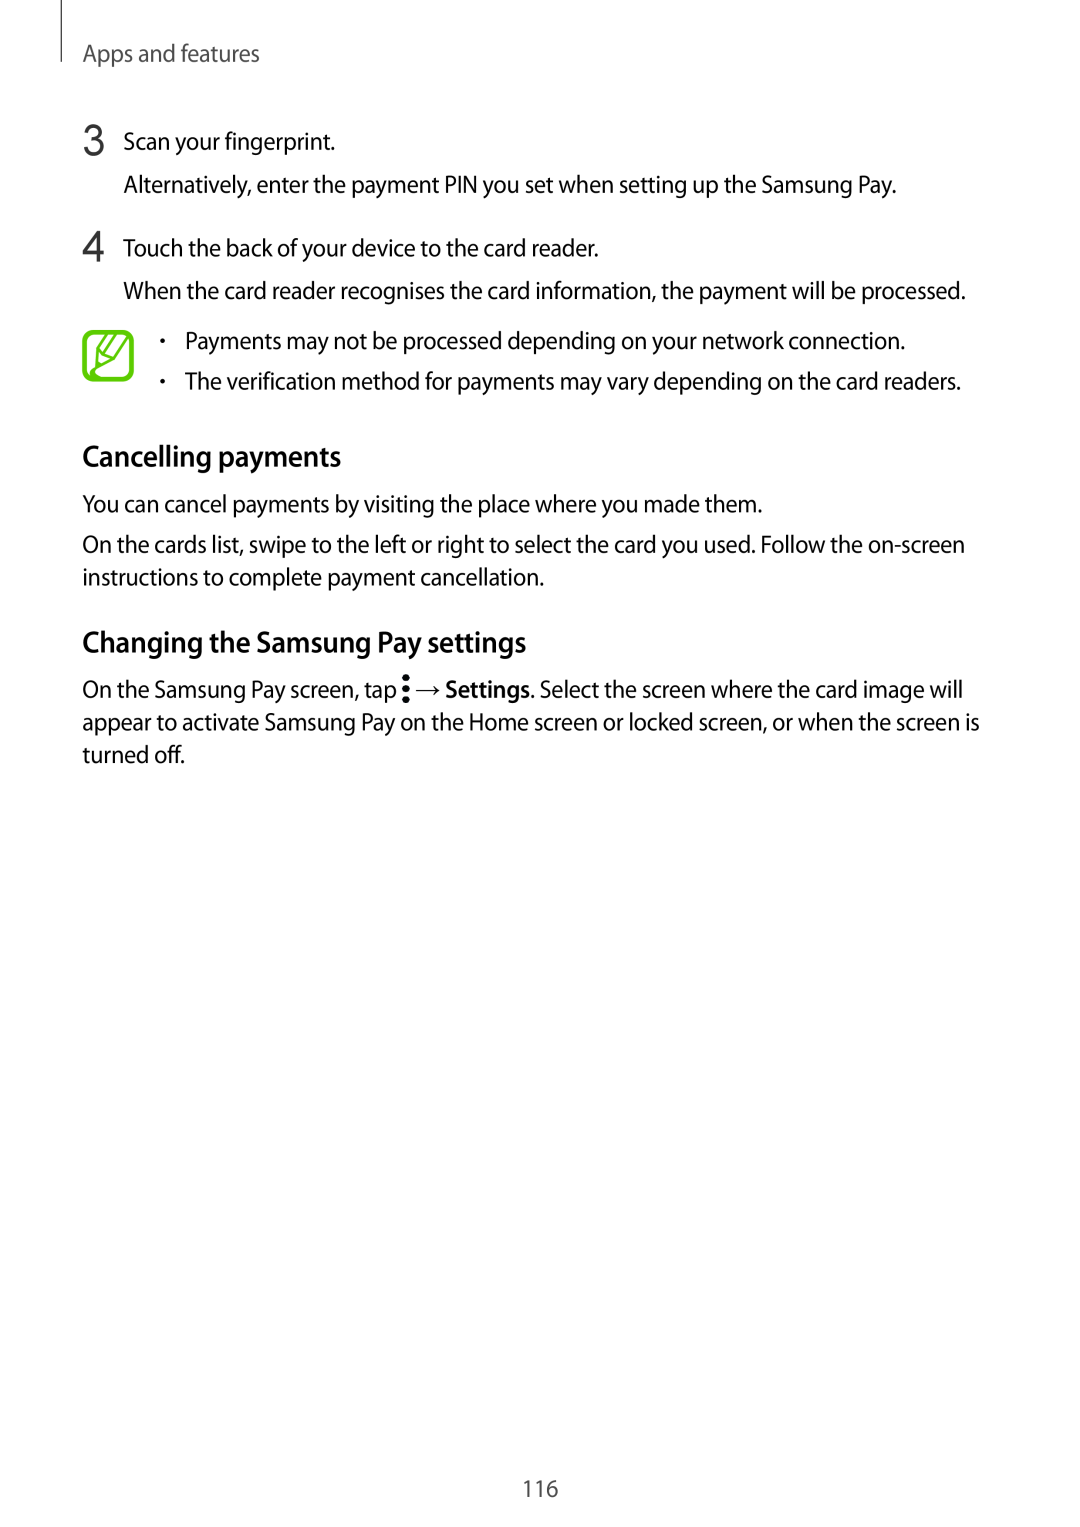 Samsung SM-A530FZDEILO, SM-A530FZDDXEF manual Cancelling payments, Changing the Samsung Pay settings, Apps and features 